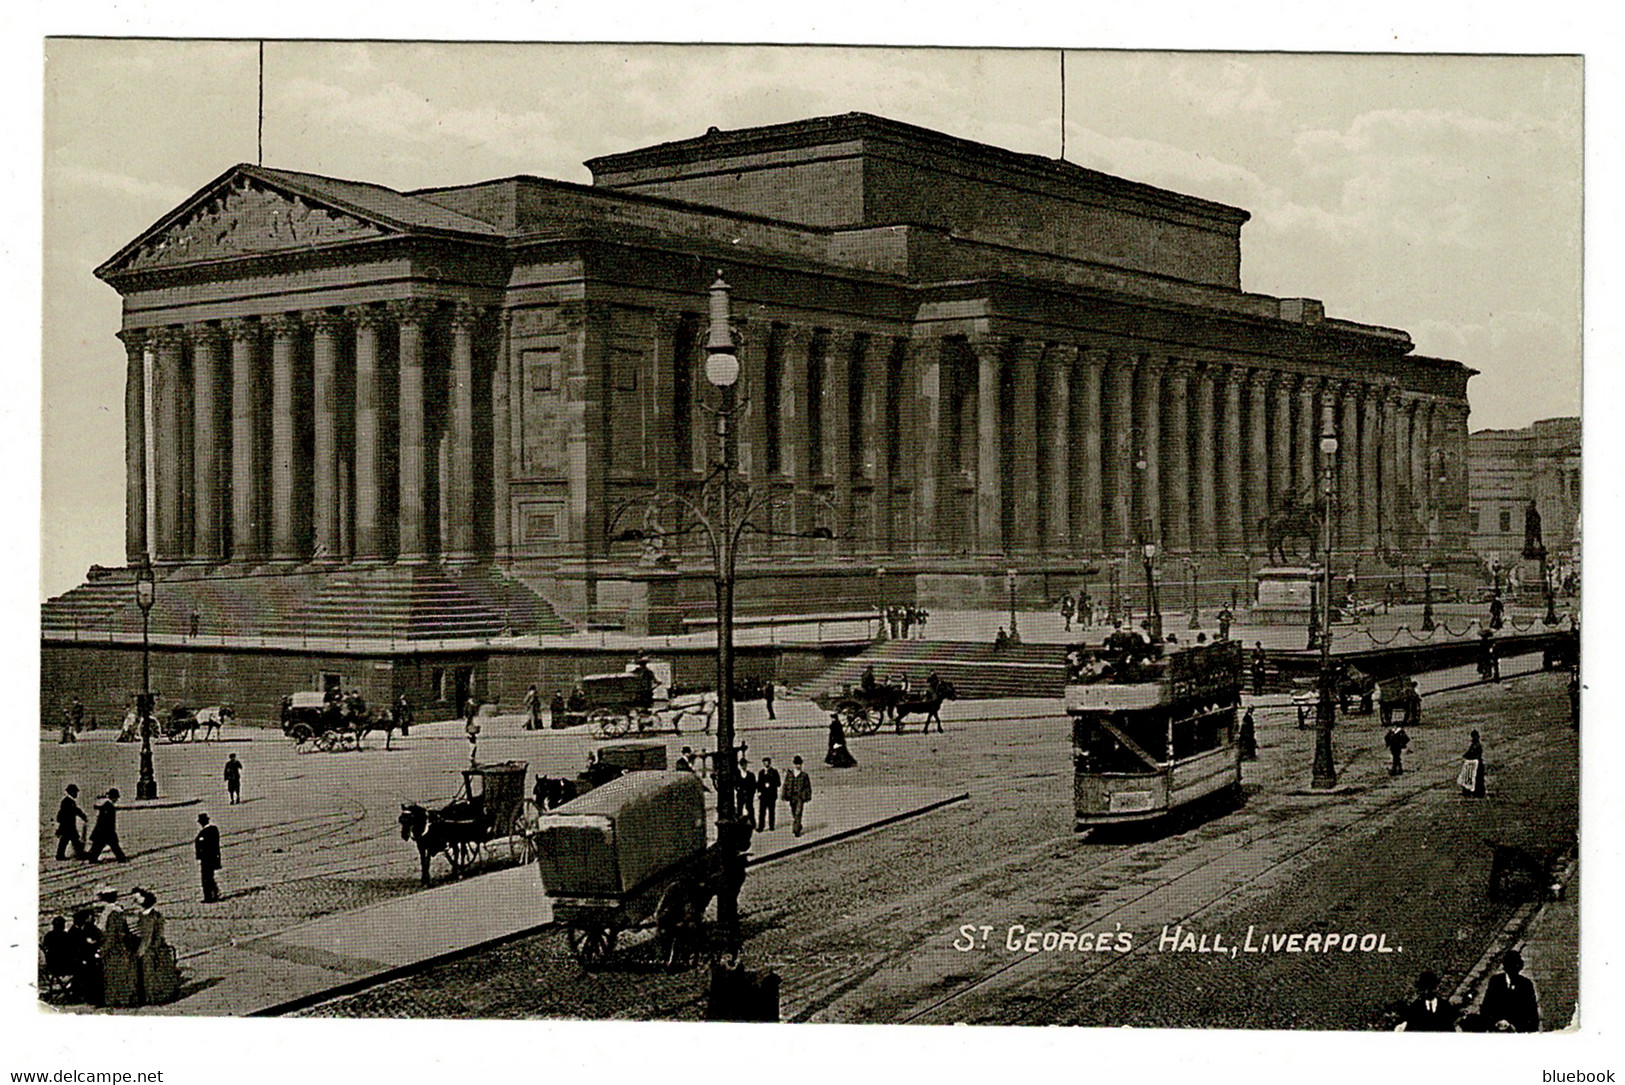 Ref 1480 - Early Postcard - Tram - Horse & Cart Outside St George's Hall Liverpool - Liverpool